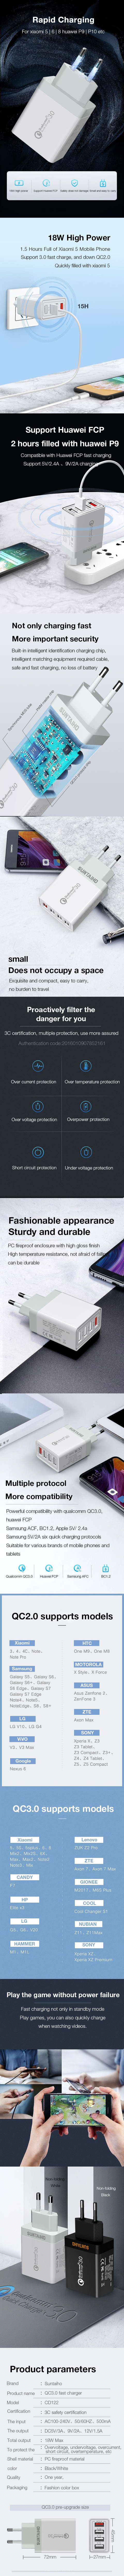 Suntaiho-4-Port-USB-Charger-Quick-Charging-QC-30-EU-Plug-US-Plug-Wall-Charger-For-iPhone-XS-11Pro-Mi-1694167